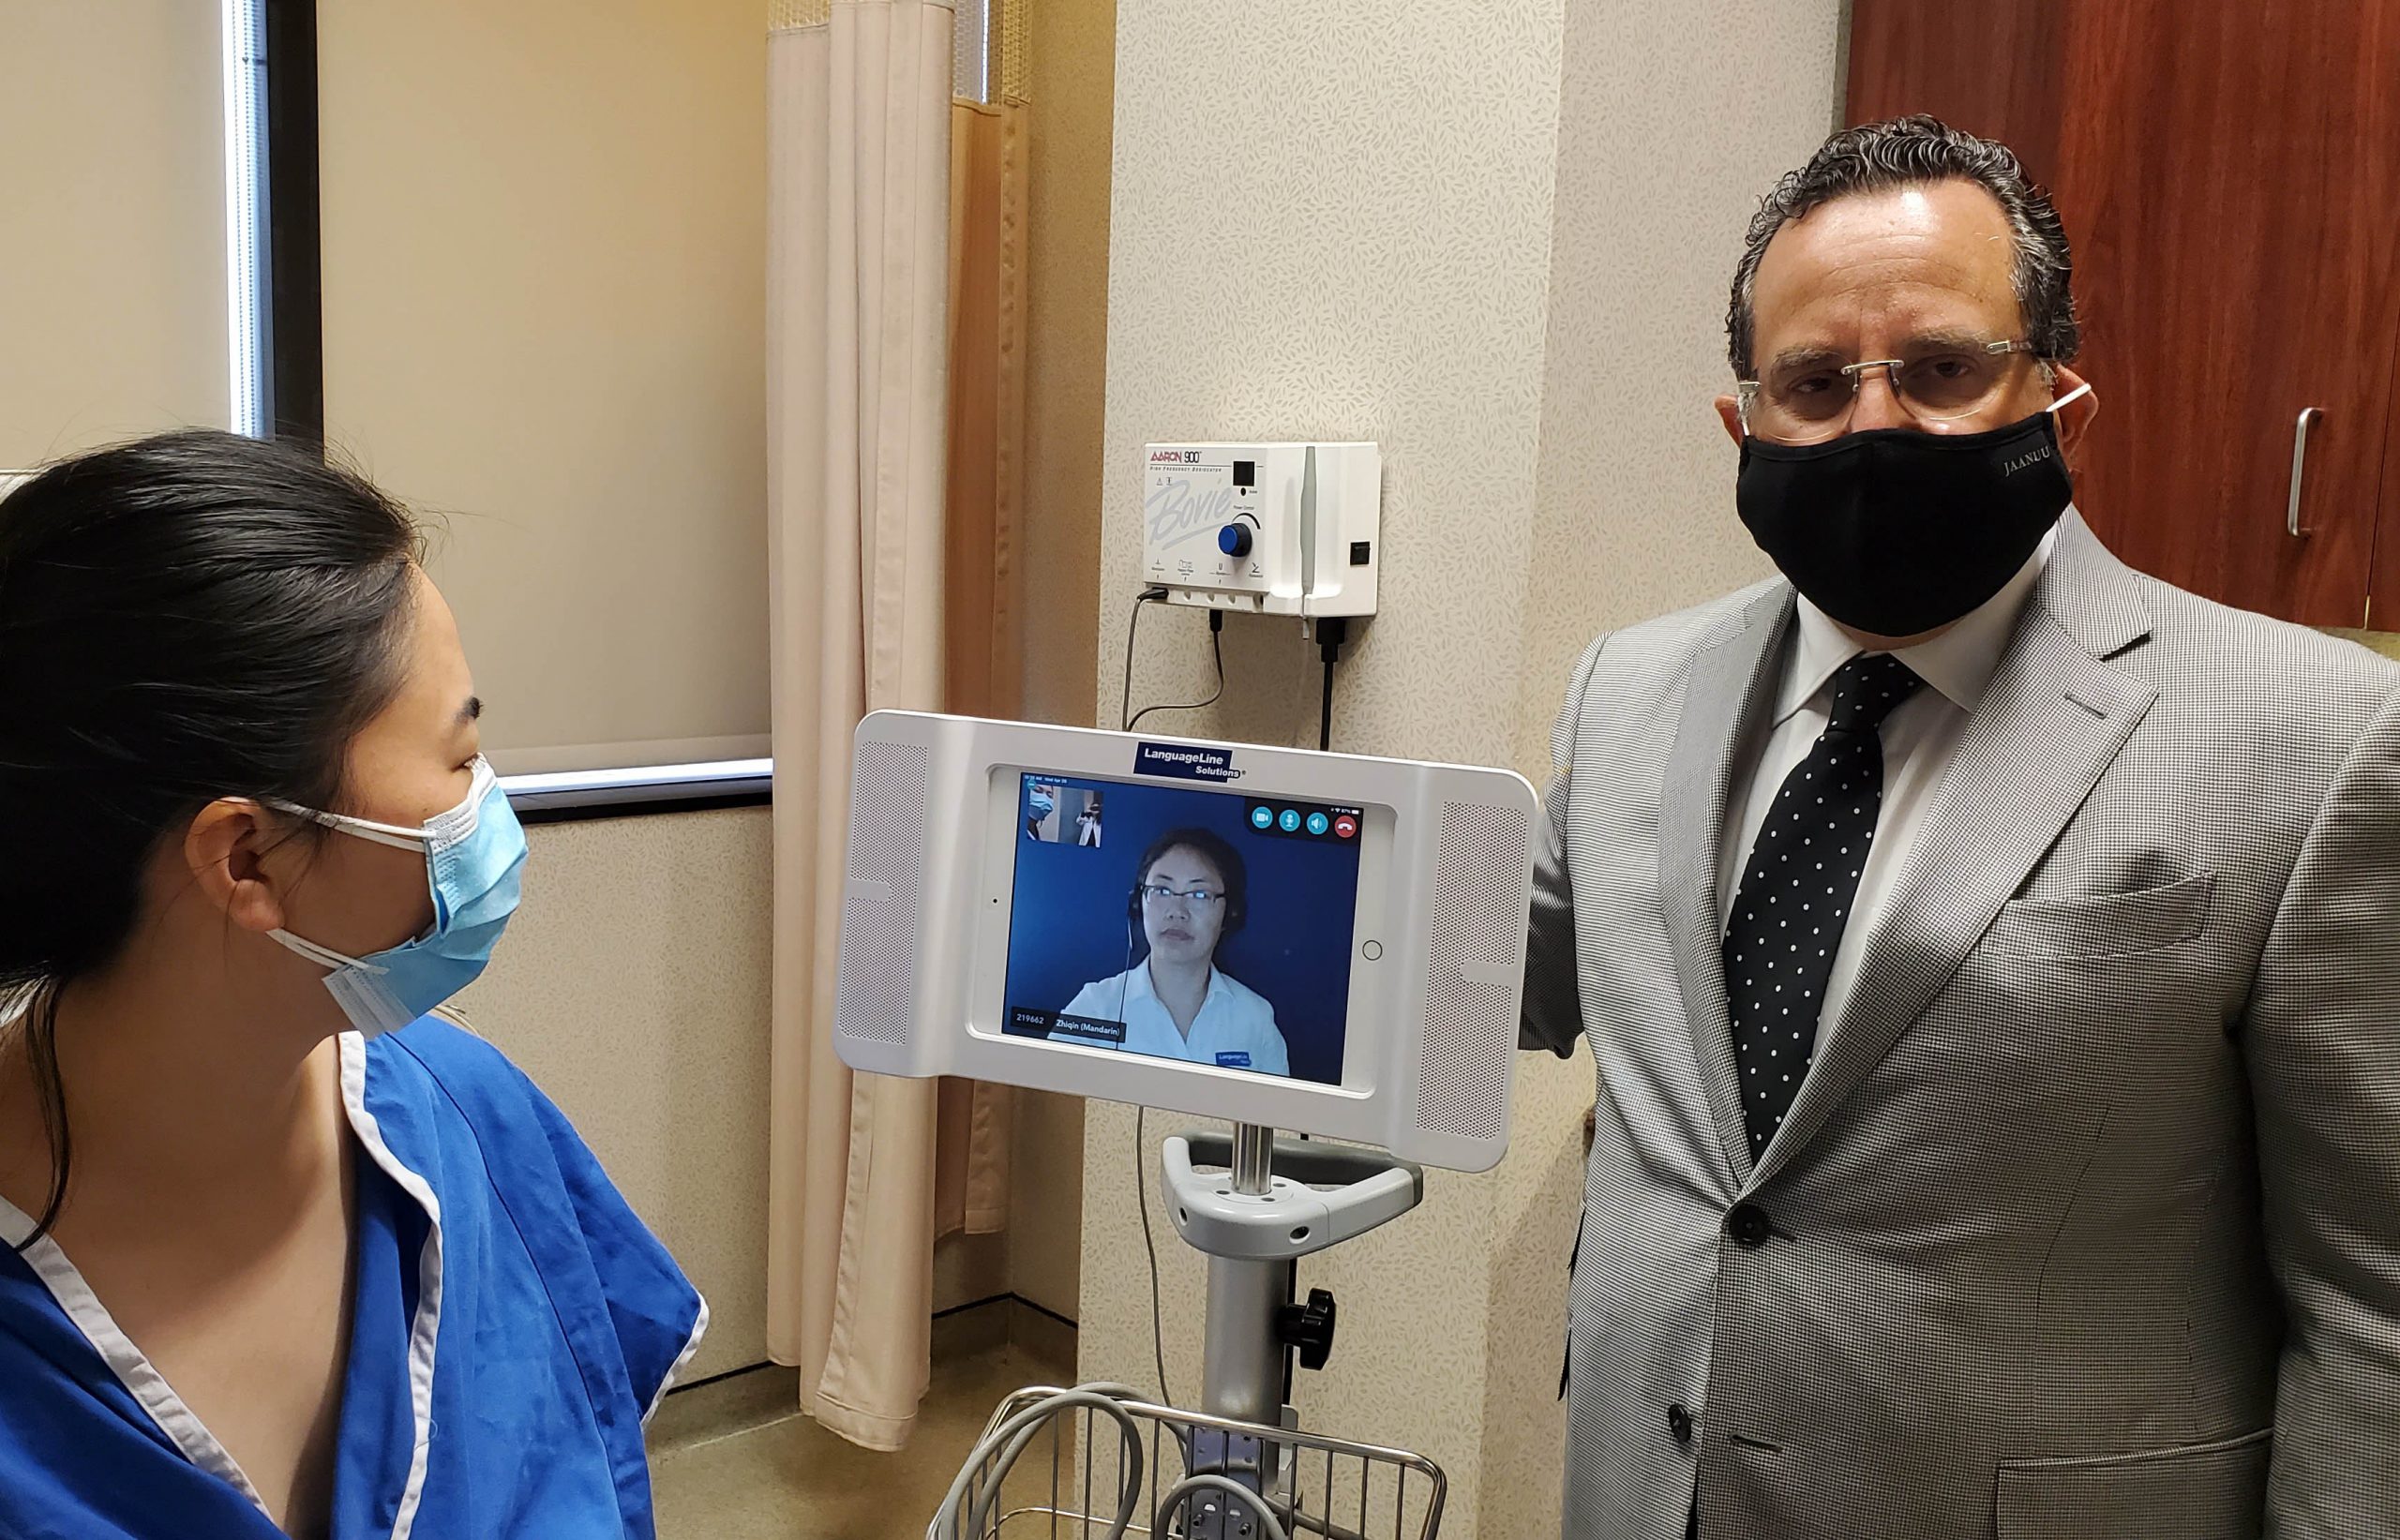 Dr. Feingold with LanguageLine Translator Machine and Patient